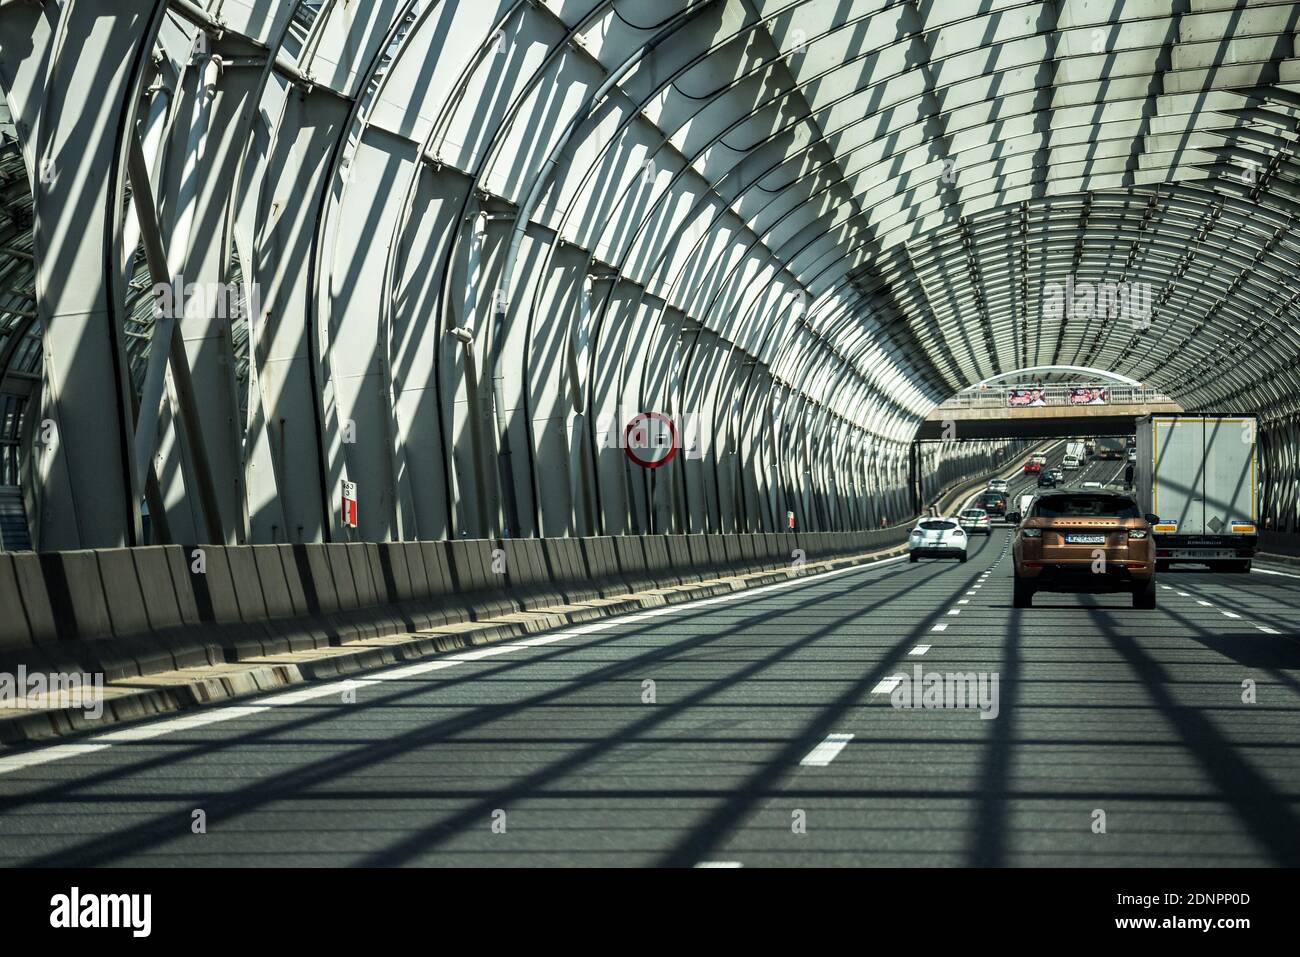 Warsaw, Poland - July 10, 2020: Traffic in Warsaw, tunnel on Trasa Toruńska. The sun passes through the metal structure. Stock Photo